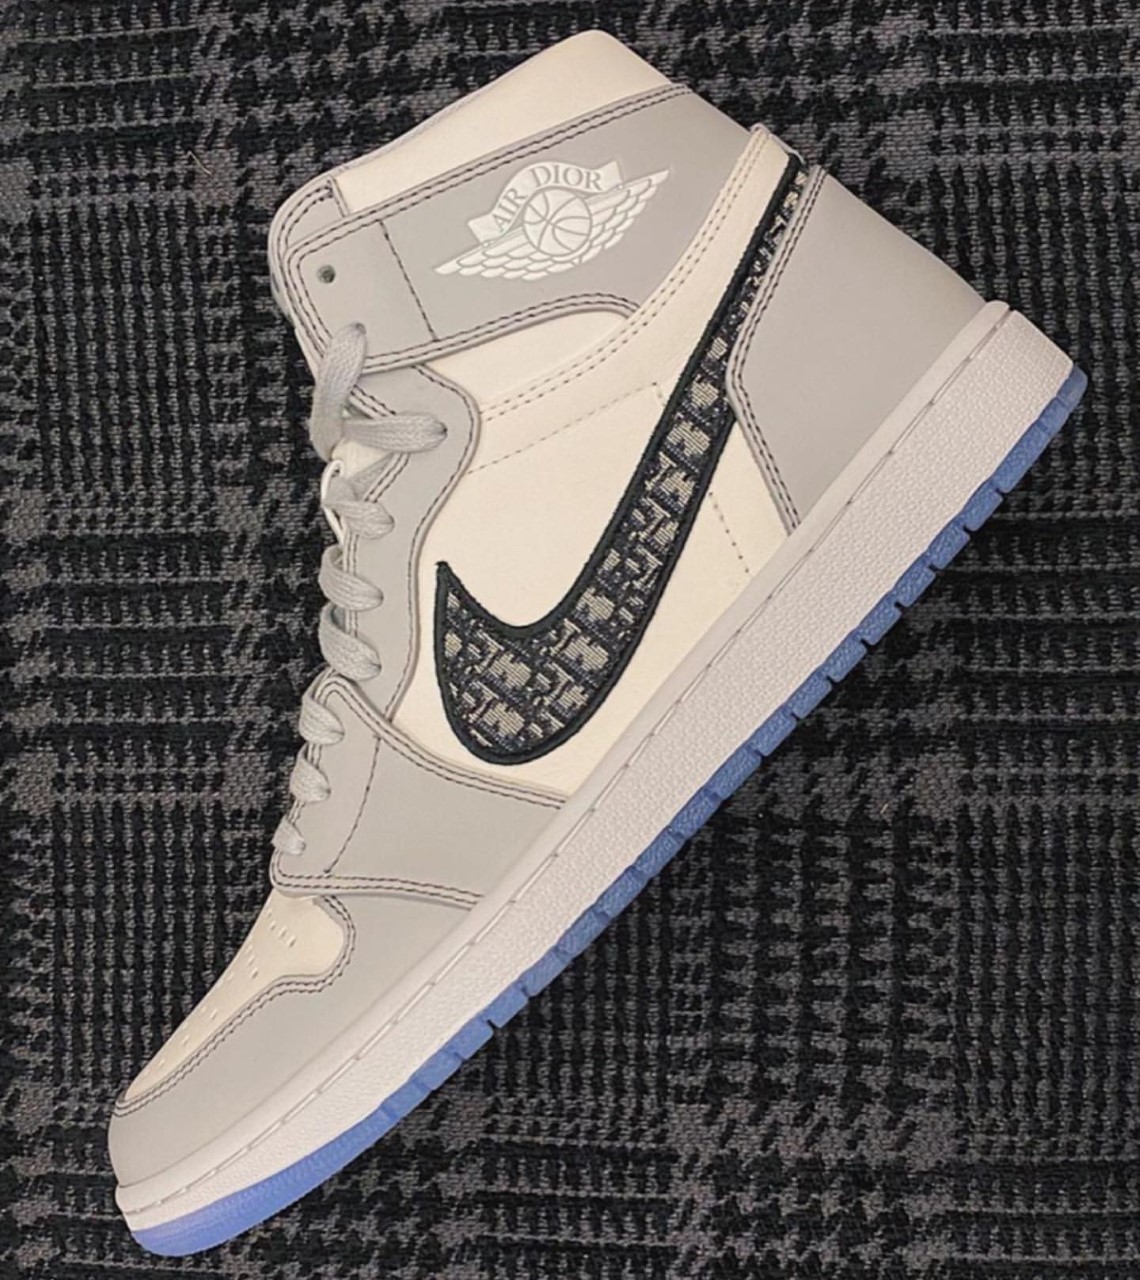 The Dior x Air Jordan 1 High Is Limited to 8500 Pairs | Sneaker Buzz